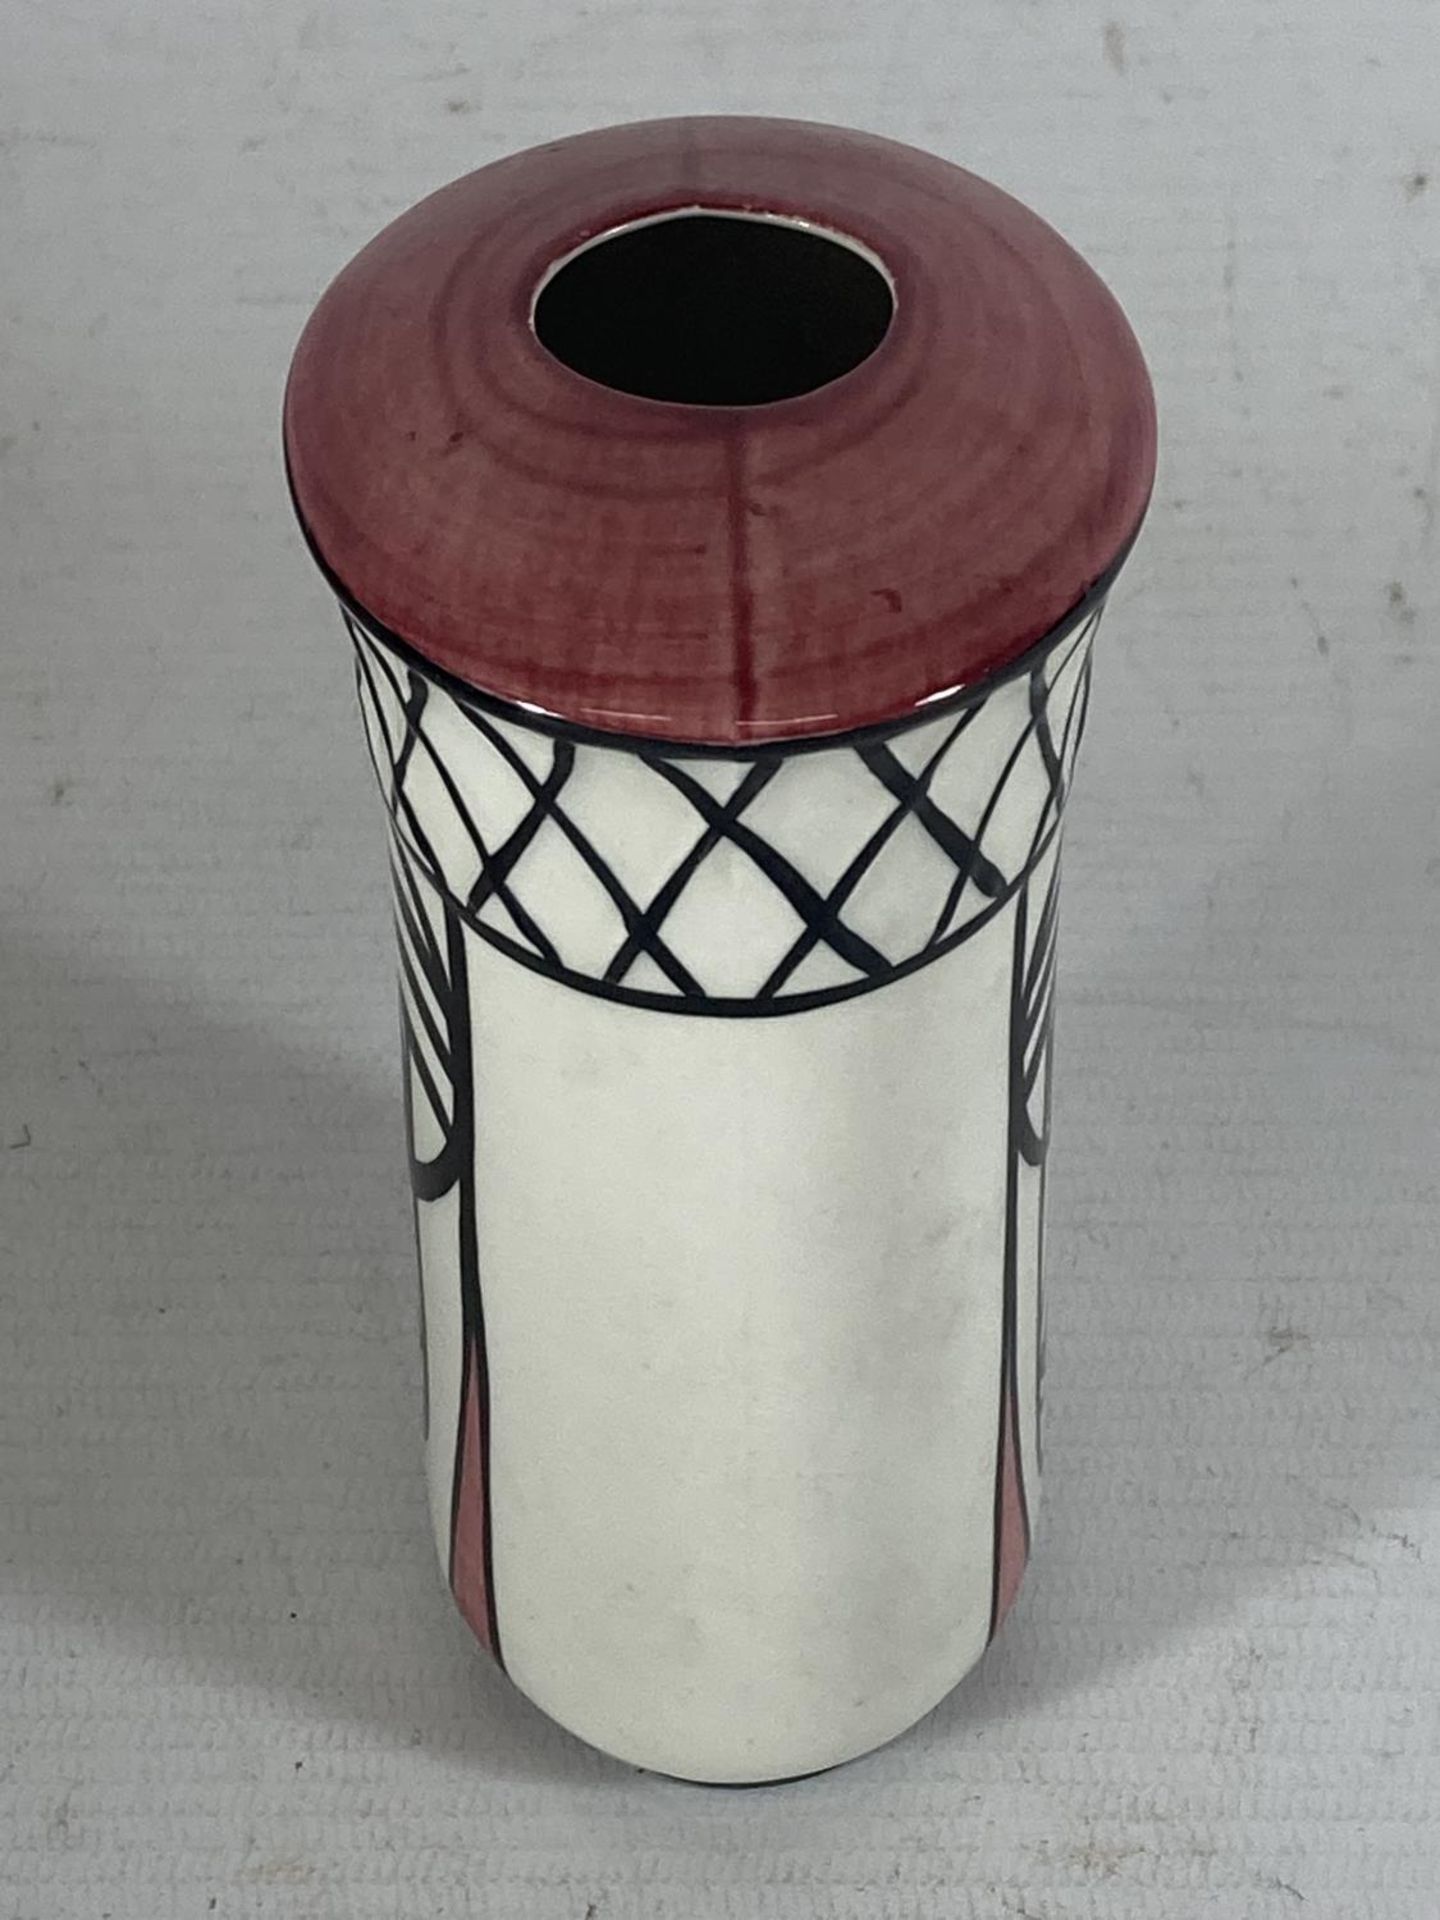 A HANDPAINTED AND SIGNED LORNA BAILEY BUD VASE CHARLES RENE MACINTOSH PATTERN - Image 2 of 3